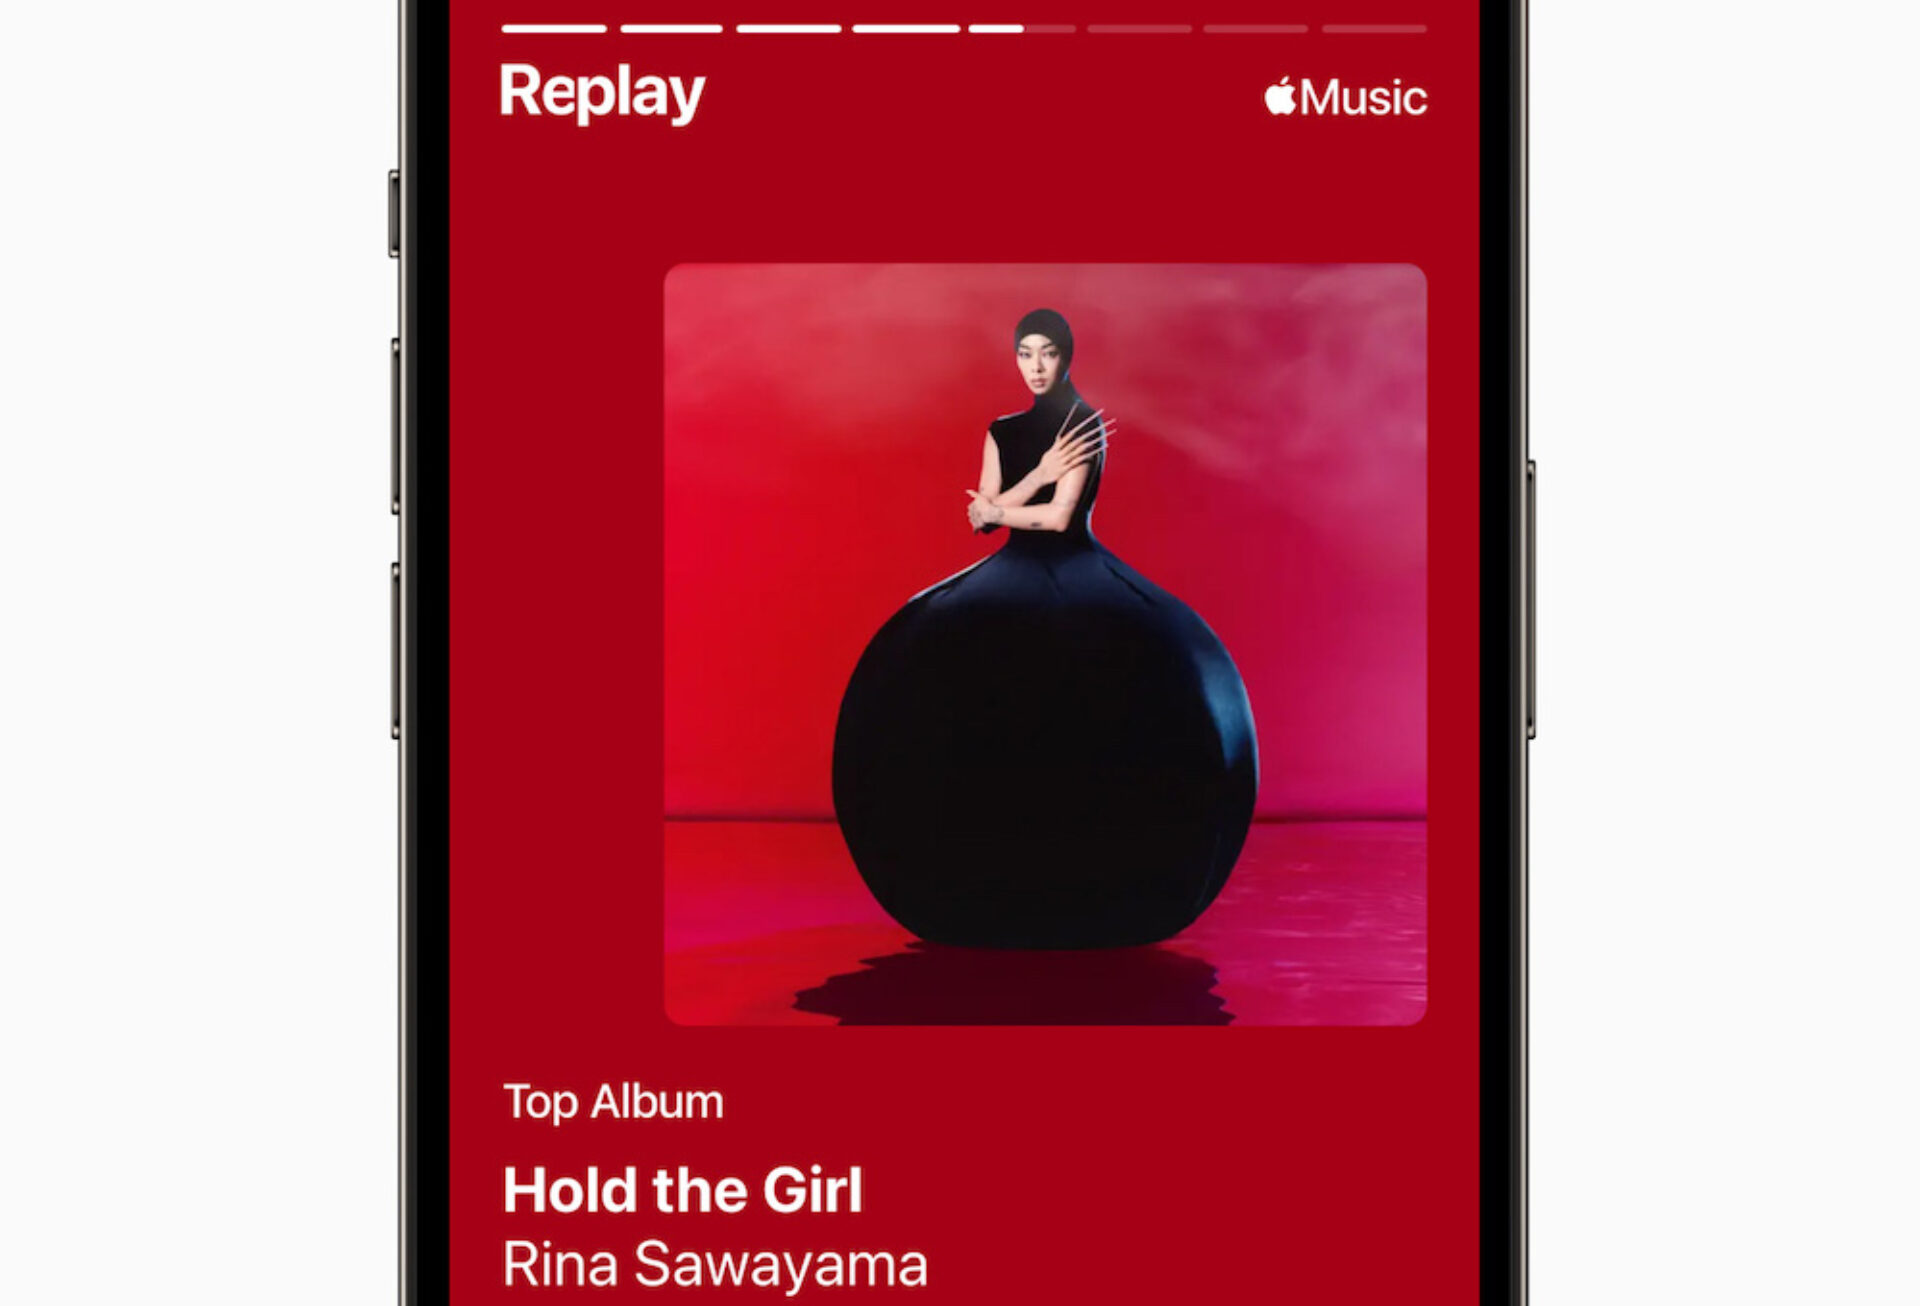 Attention, it's that favorite time of year... when everyone shares their current music tastes and favorites. Up first is Apple Music!